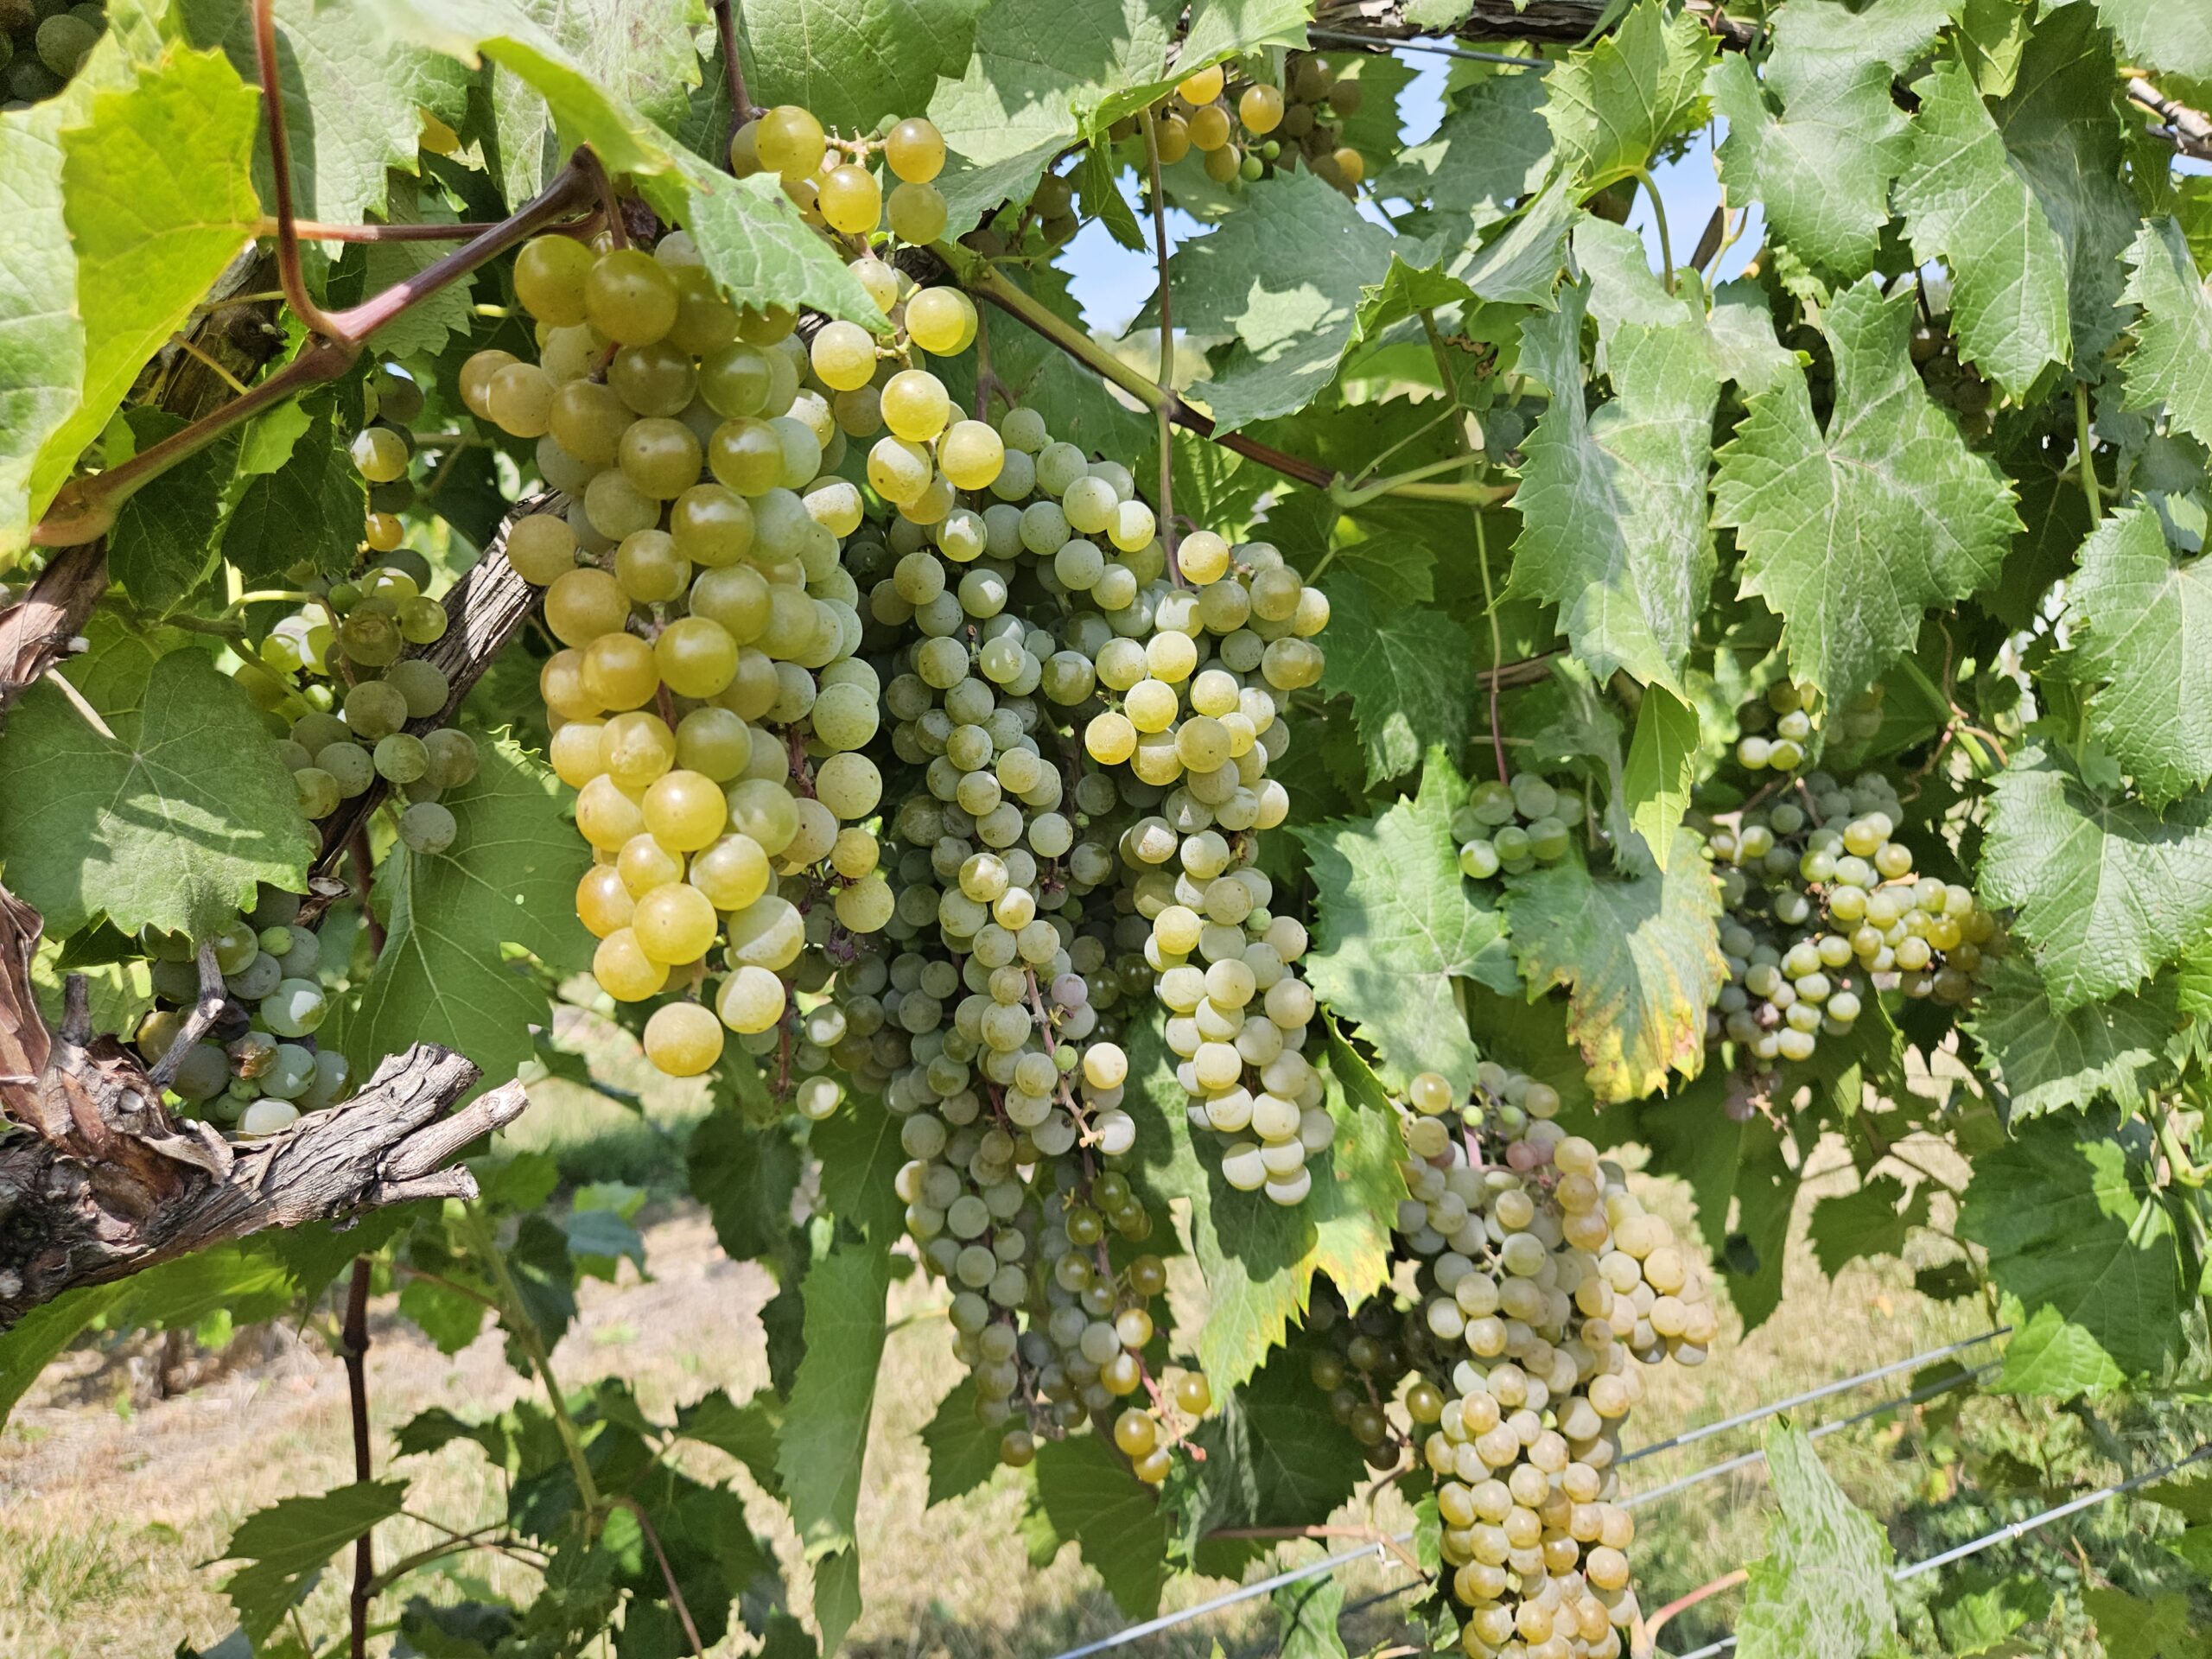 Large bunches of green grapes on a vine